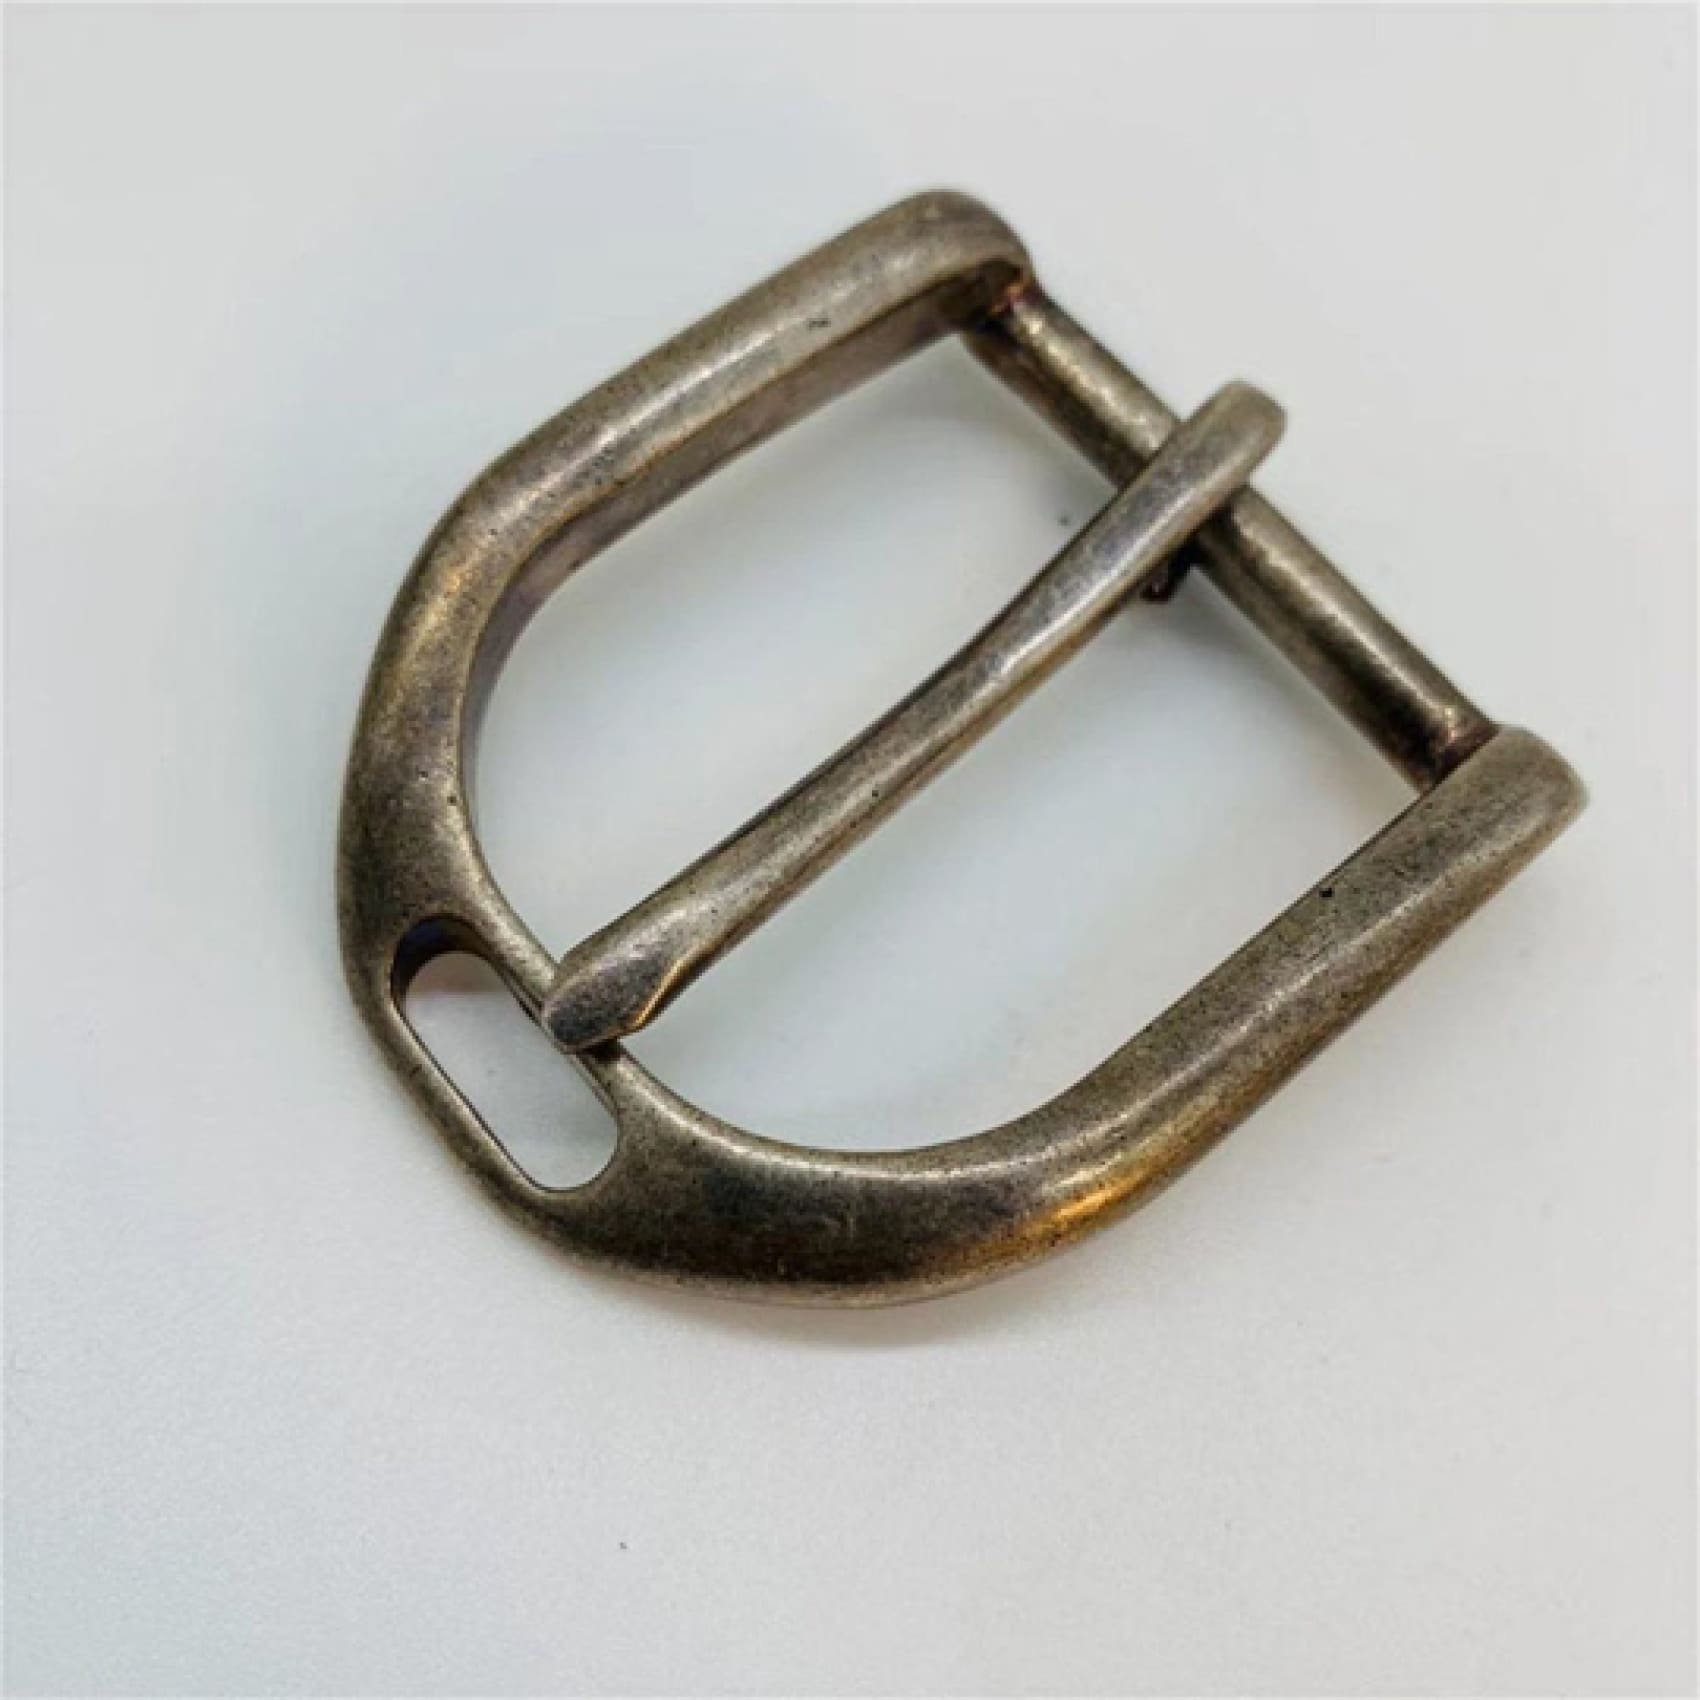 35mm Antique Silver Finish Sterling Silver Buckle D shape Women Leather Strap Fastener Buckle